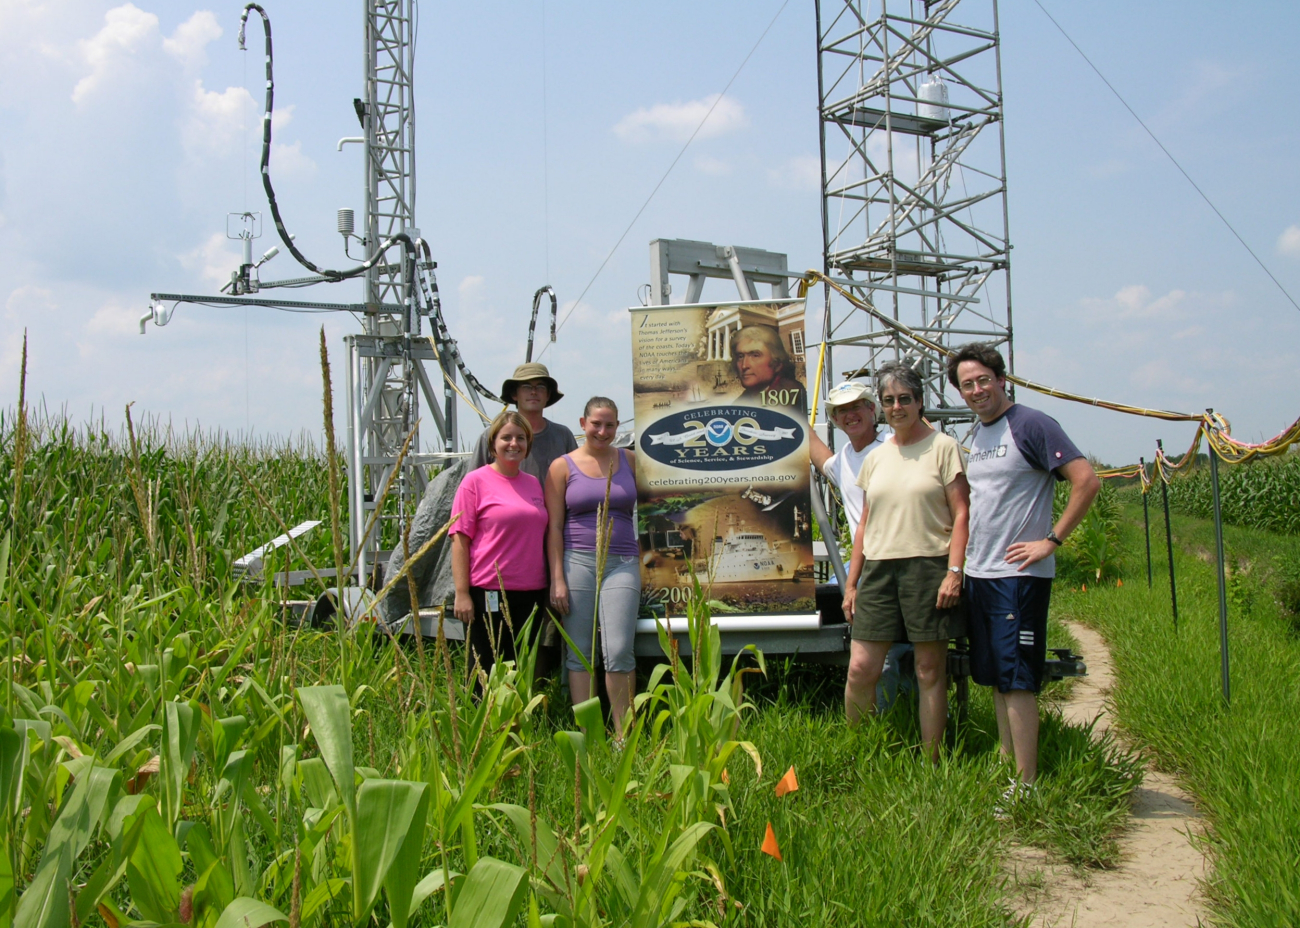 Greetings from the (corn) field! The Air Resources Laboratory is collaboratingwith the U